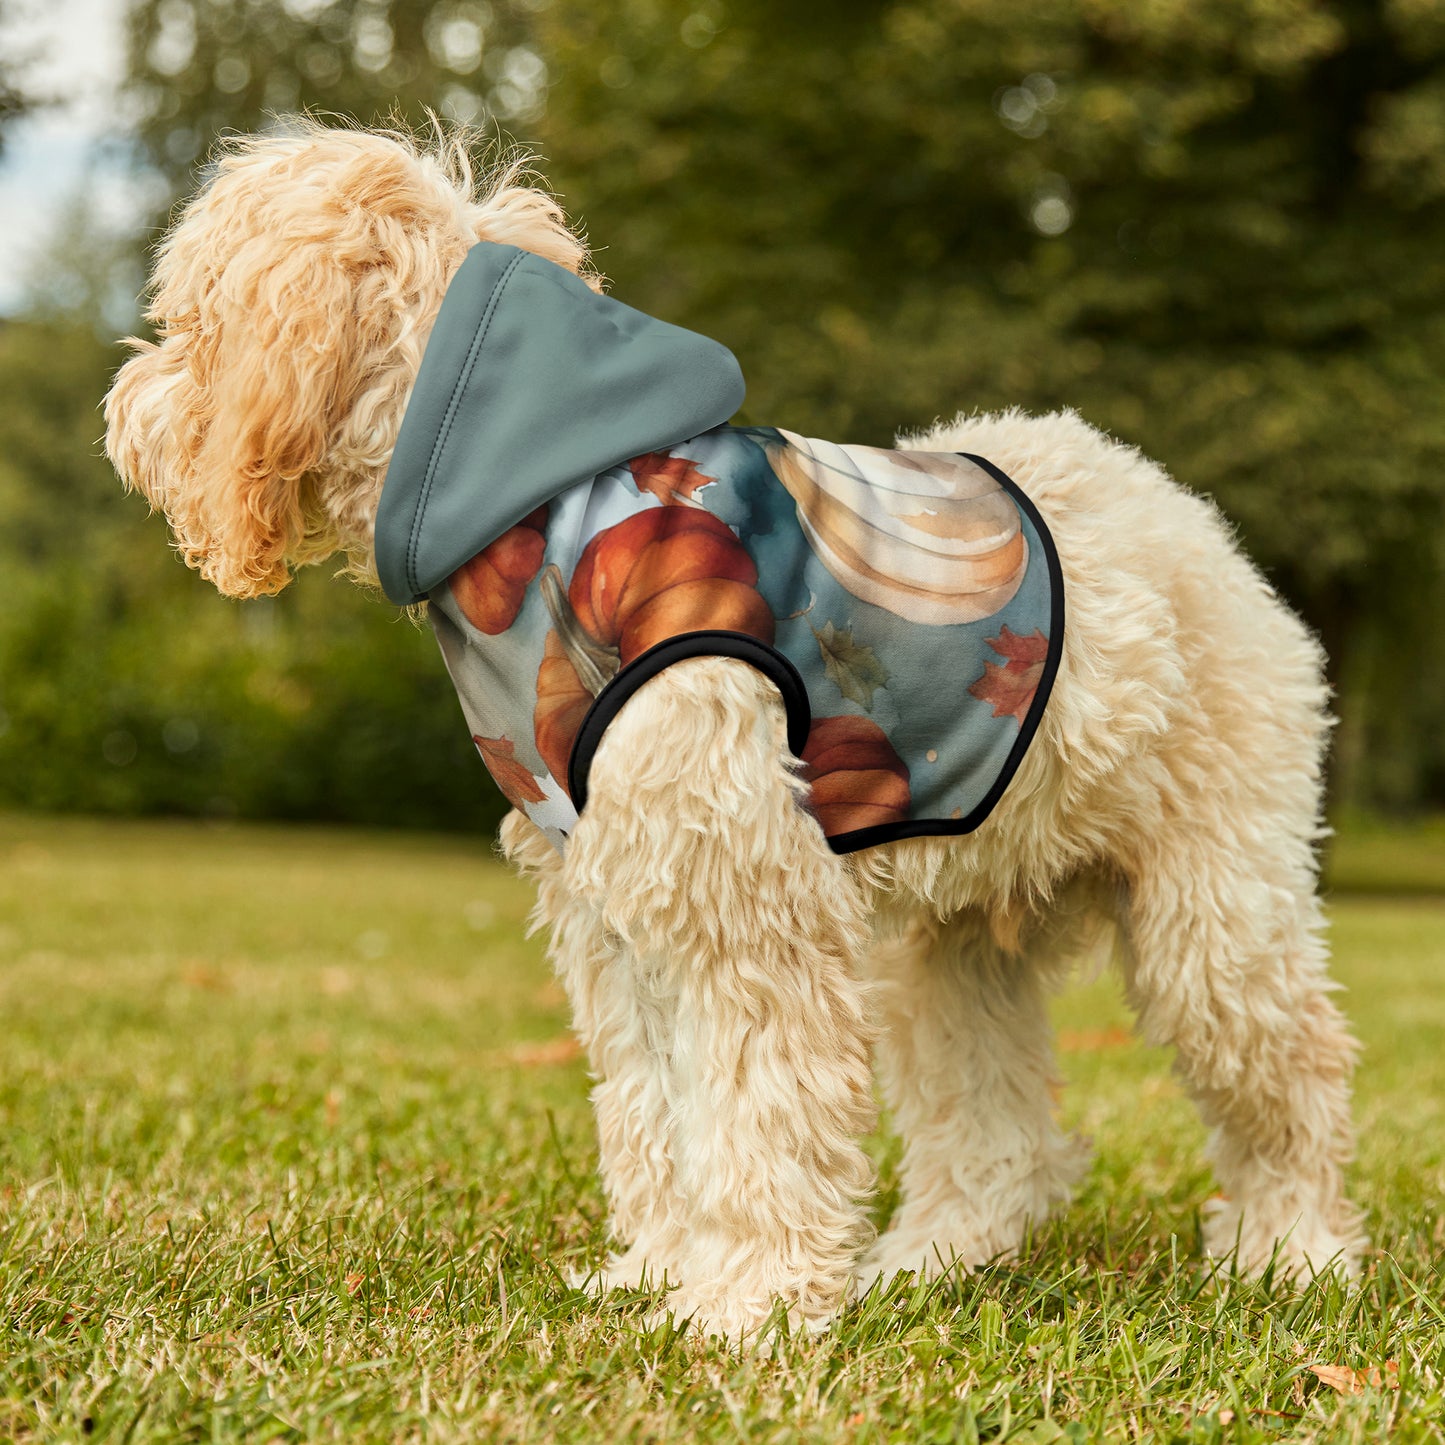 Fall Pumpkin Dog and Cat Hoodie Jacket - Cozy Pet Apparel for Autumn